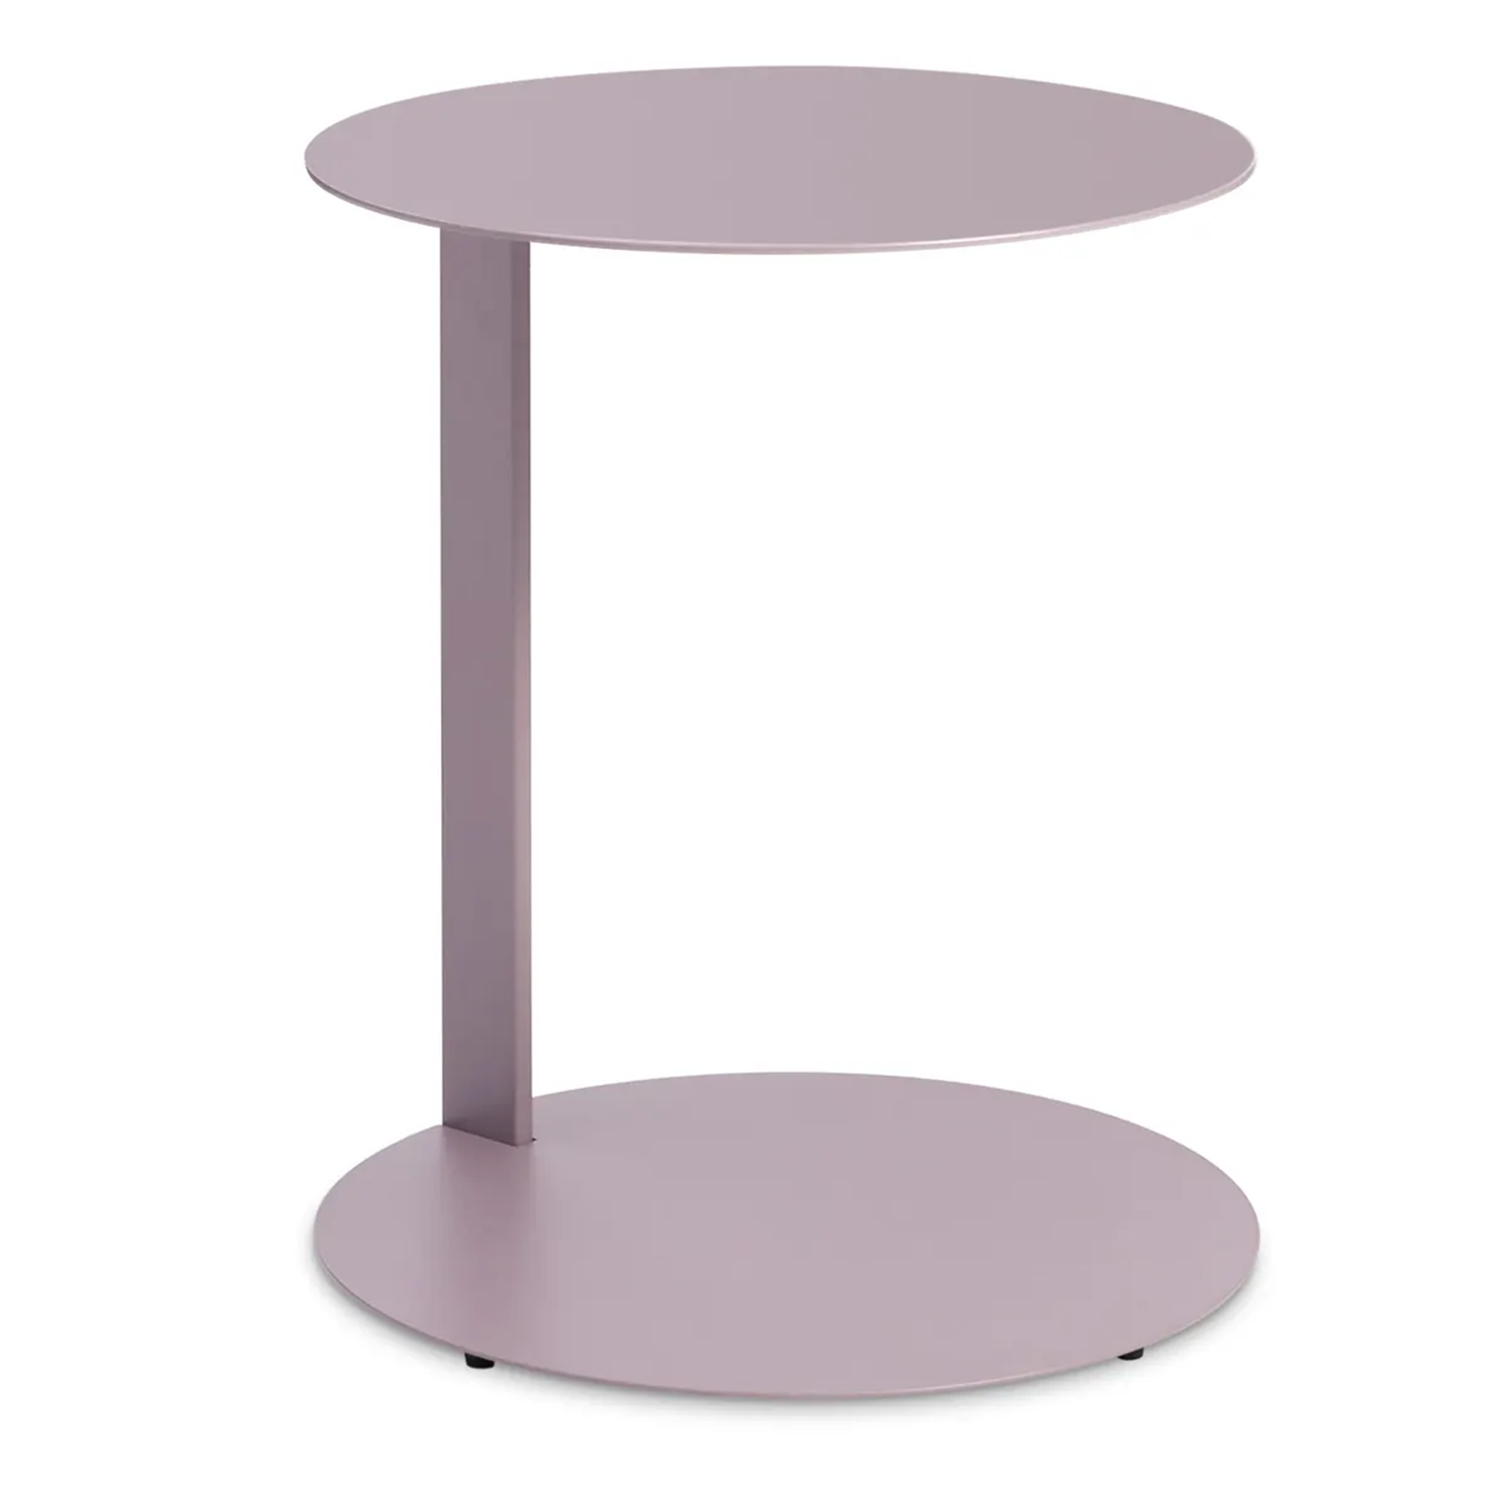 blu dot note large side table in oyster